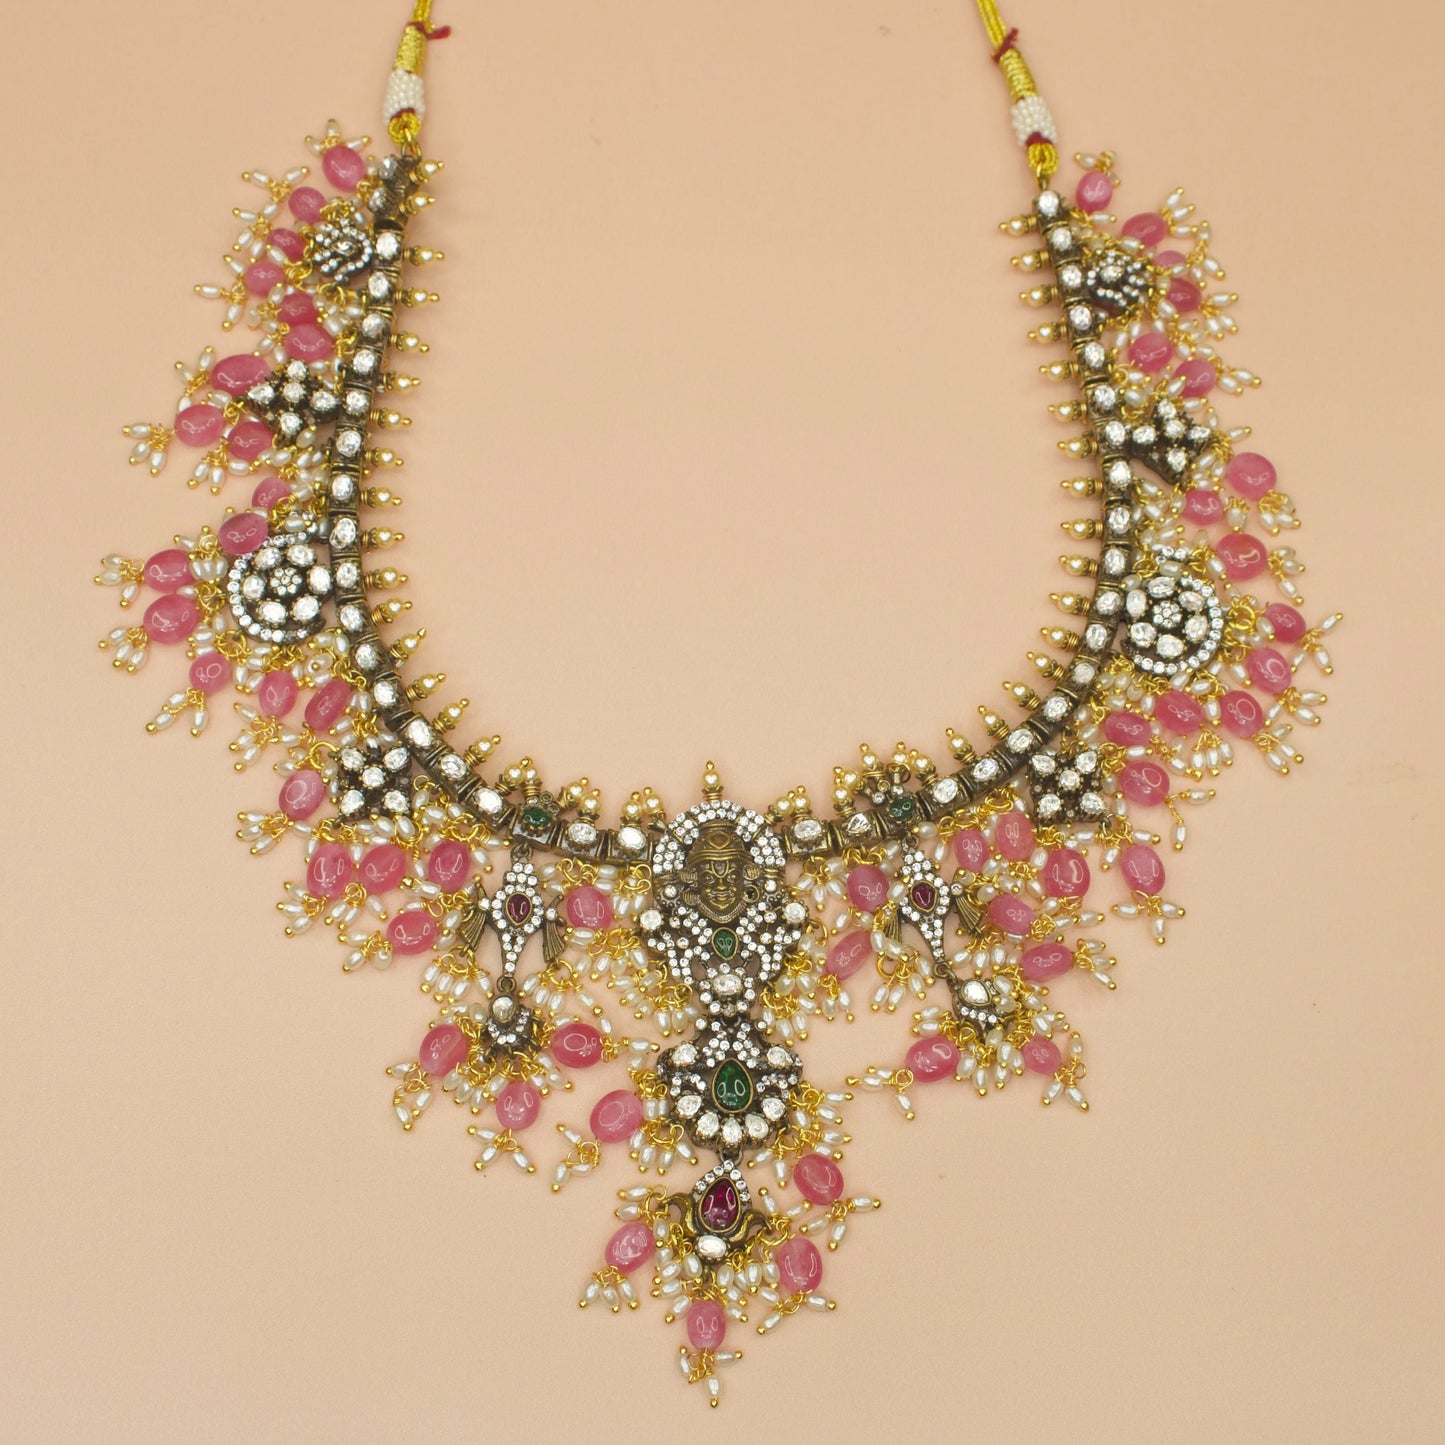 Lord Balaji Victorian Pearls Necklace with Earrings